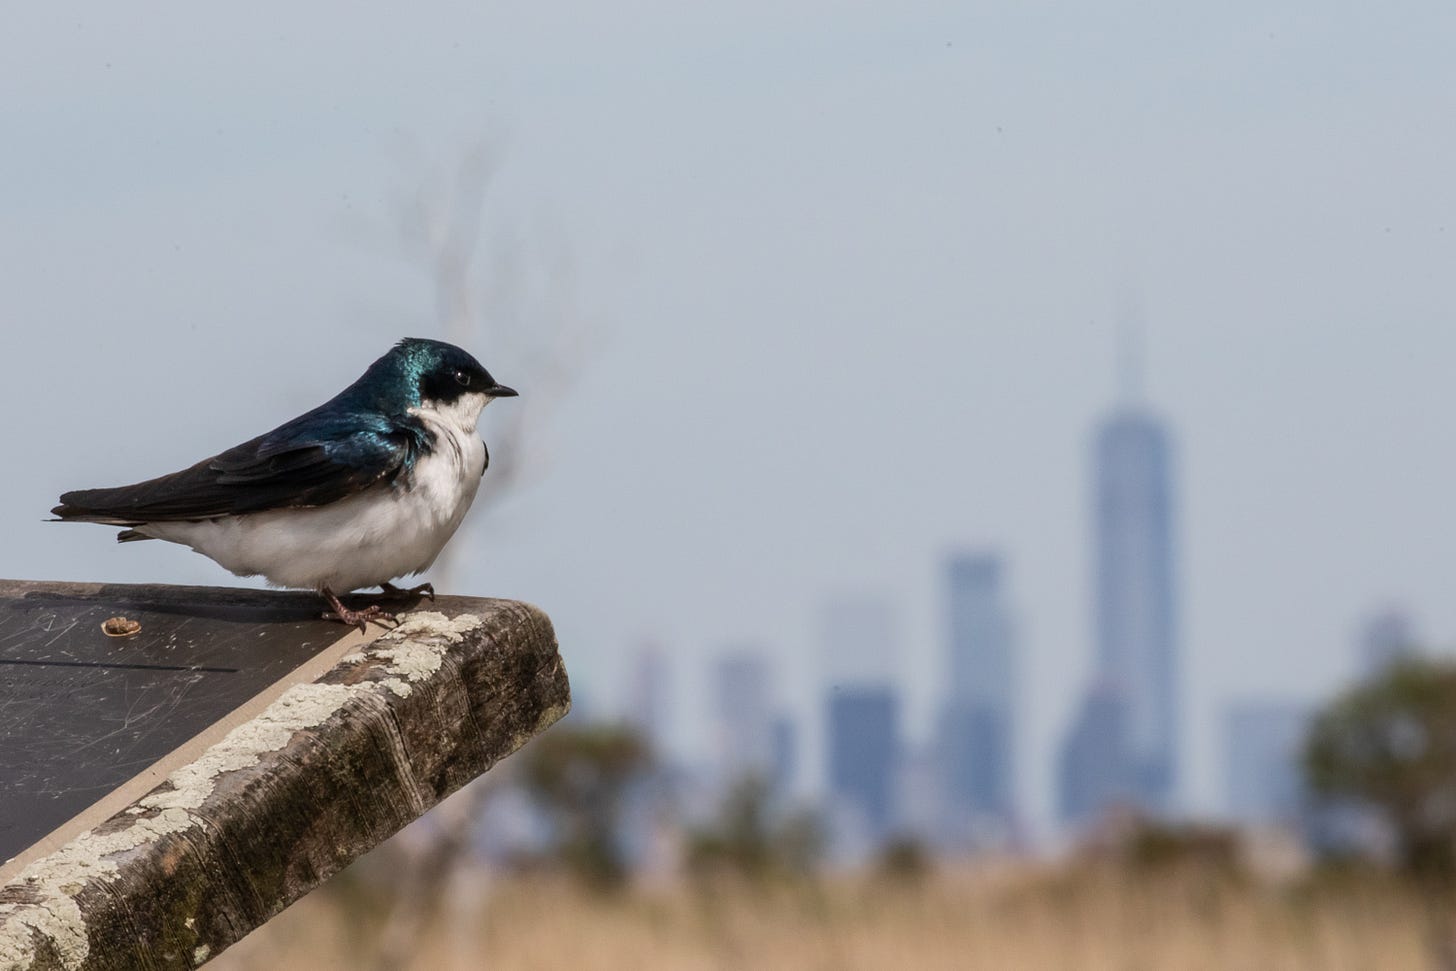 a tree swallow - long, metallic blue-green bird with a white throat and undersides, perched on an interpretive side in the bottom left of the image, facing right. the new york city skyline, including the freedom tower, is blurry in the background.